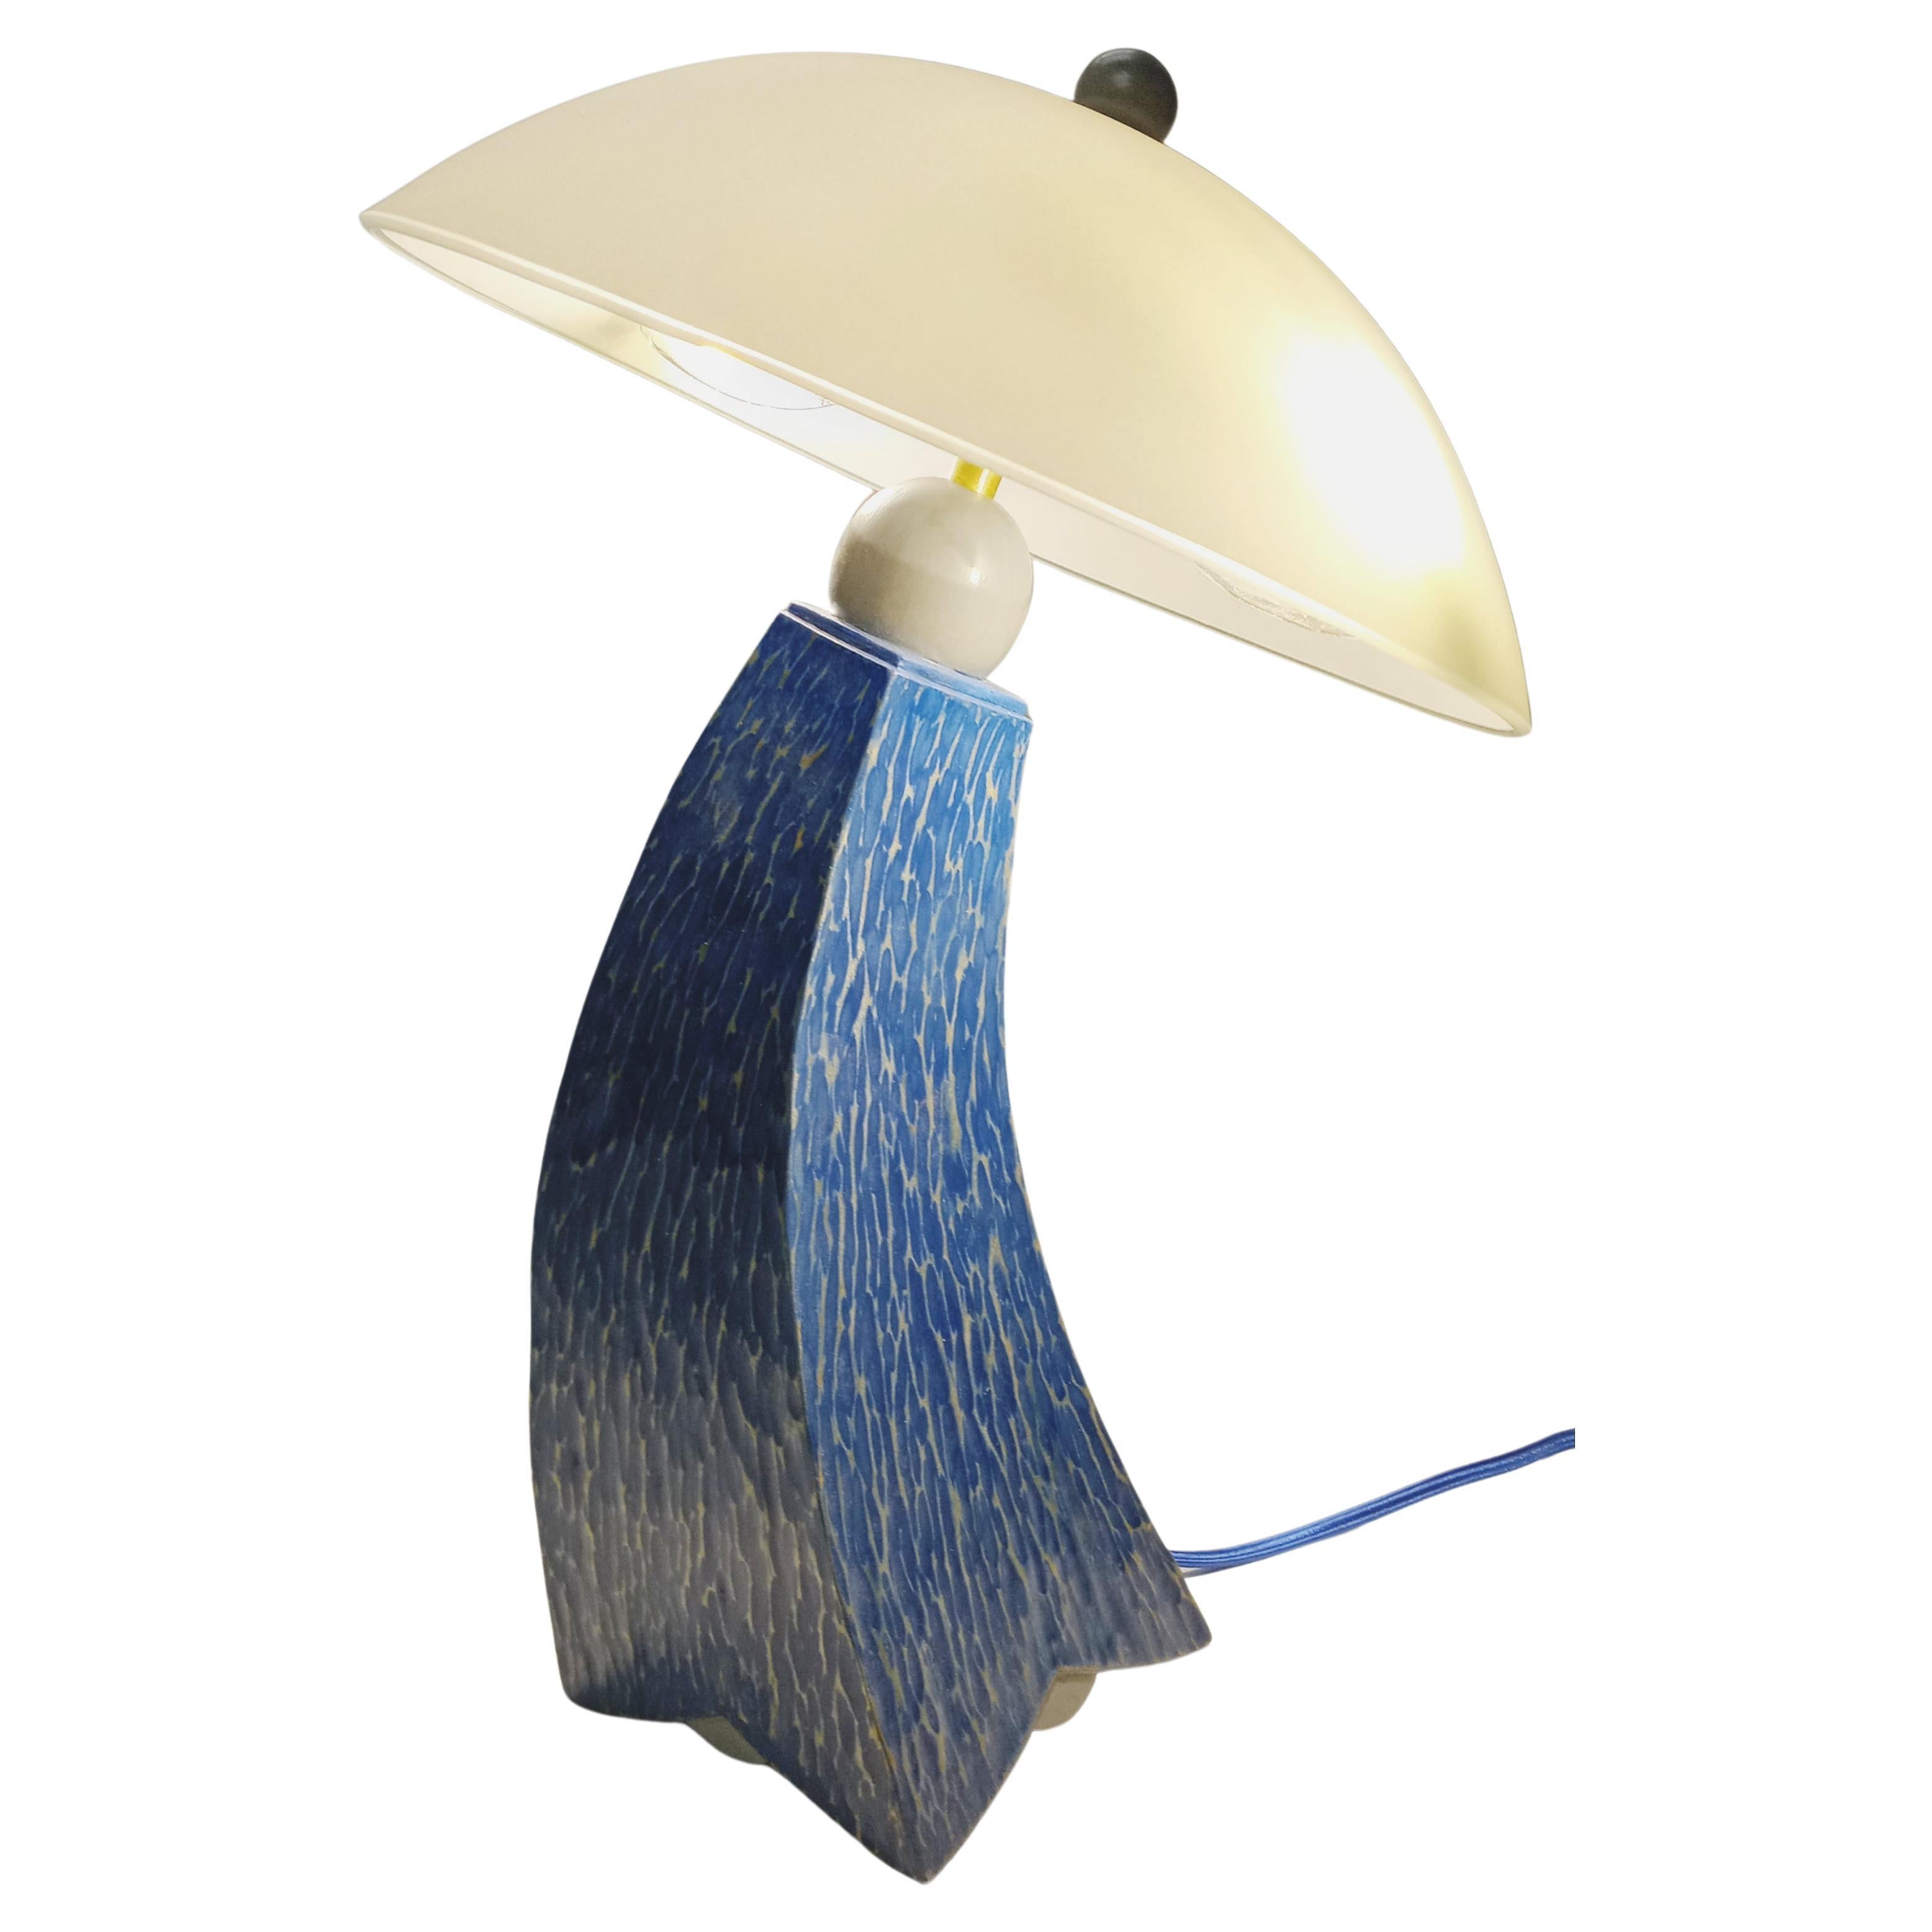 Table lamp min blue and grey textured milk painted jazz inspired design in stock